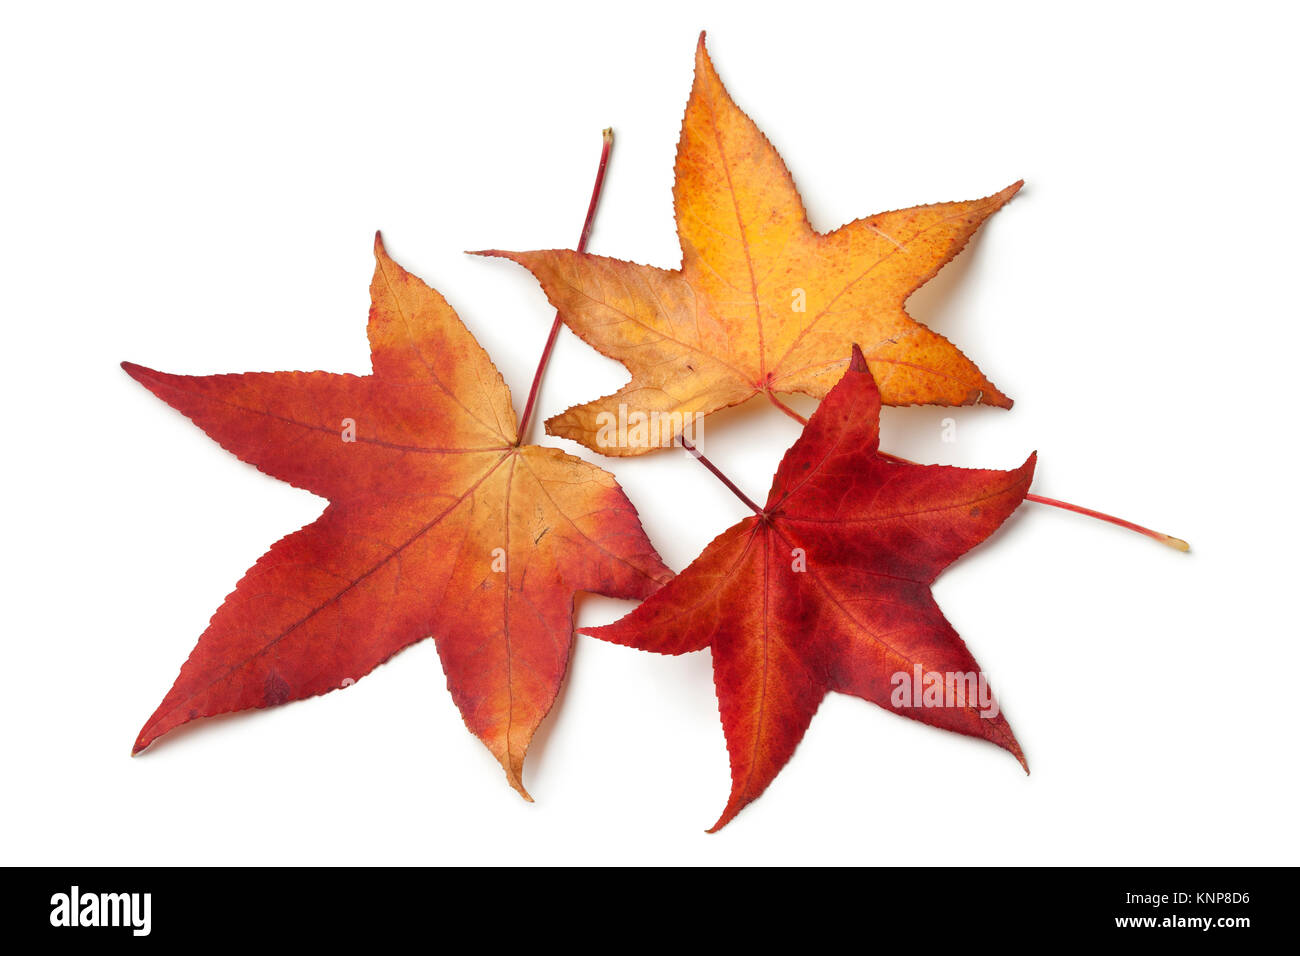 Red autumn leaves of an American sweetgum tree on white background Stock Photo